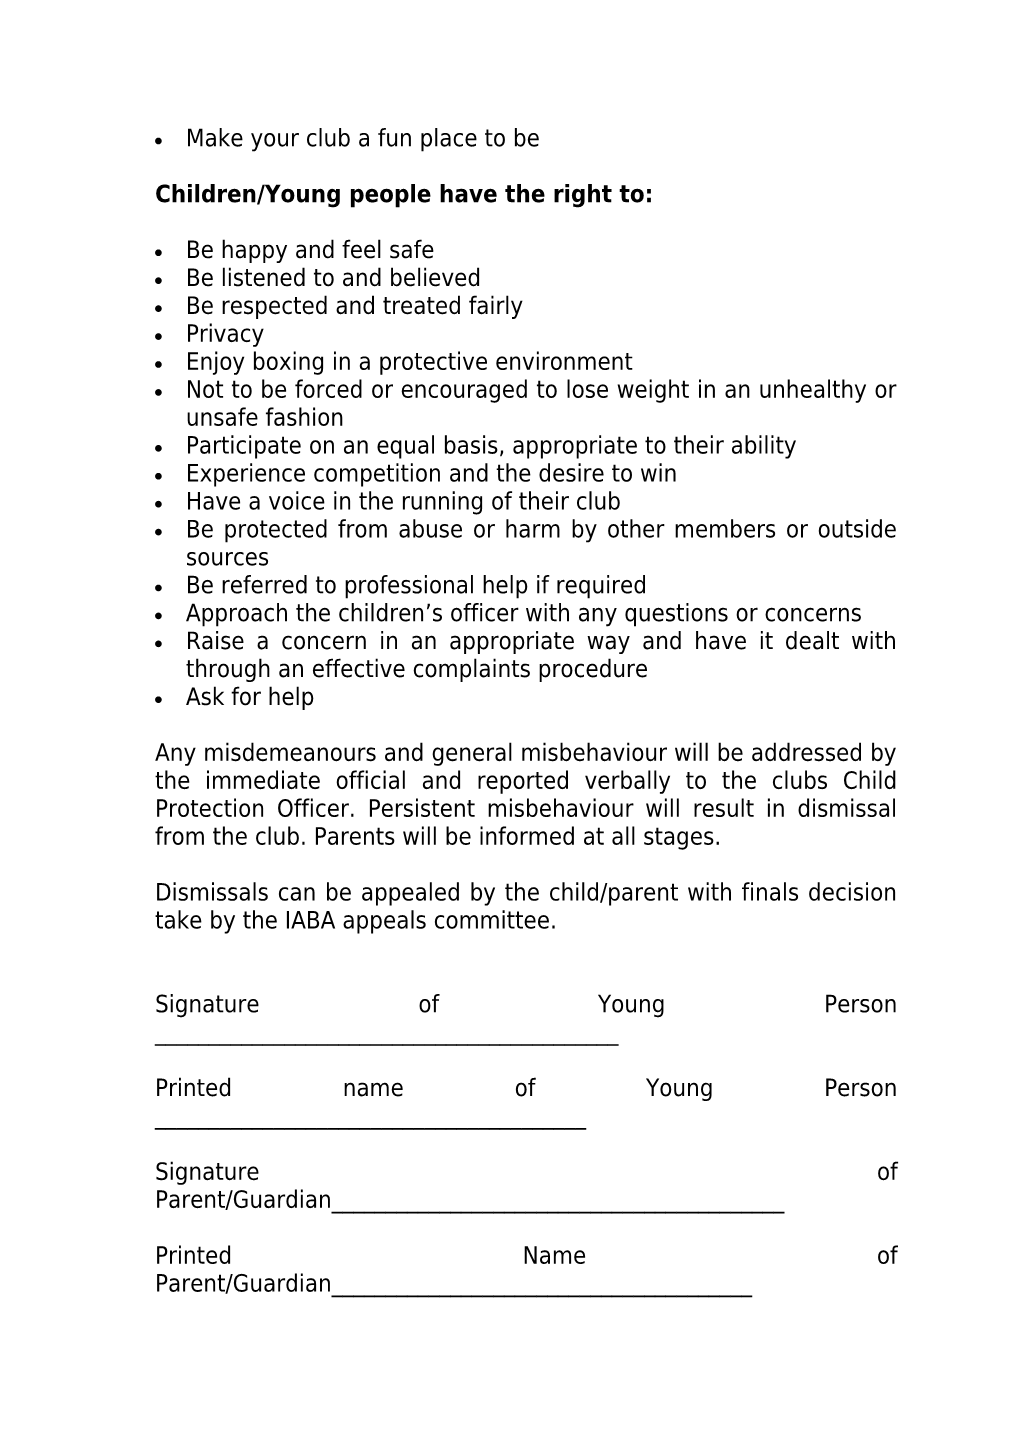 Code of Conduct for Young Boxers